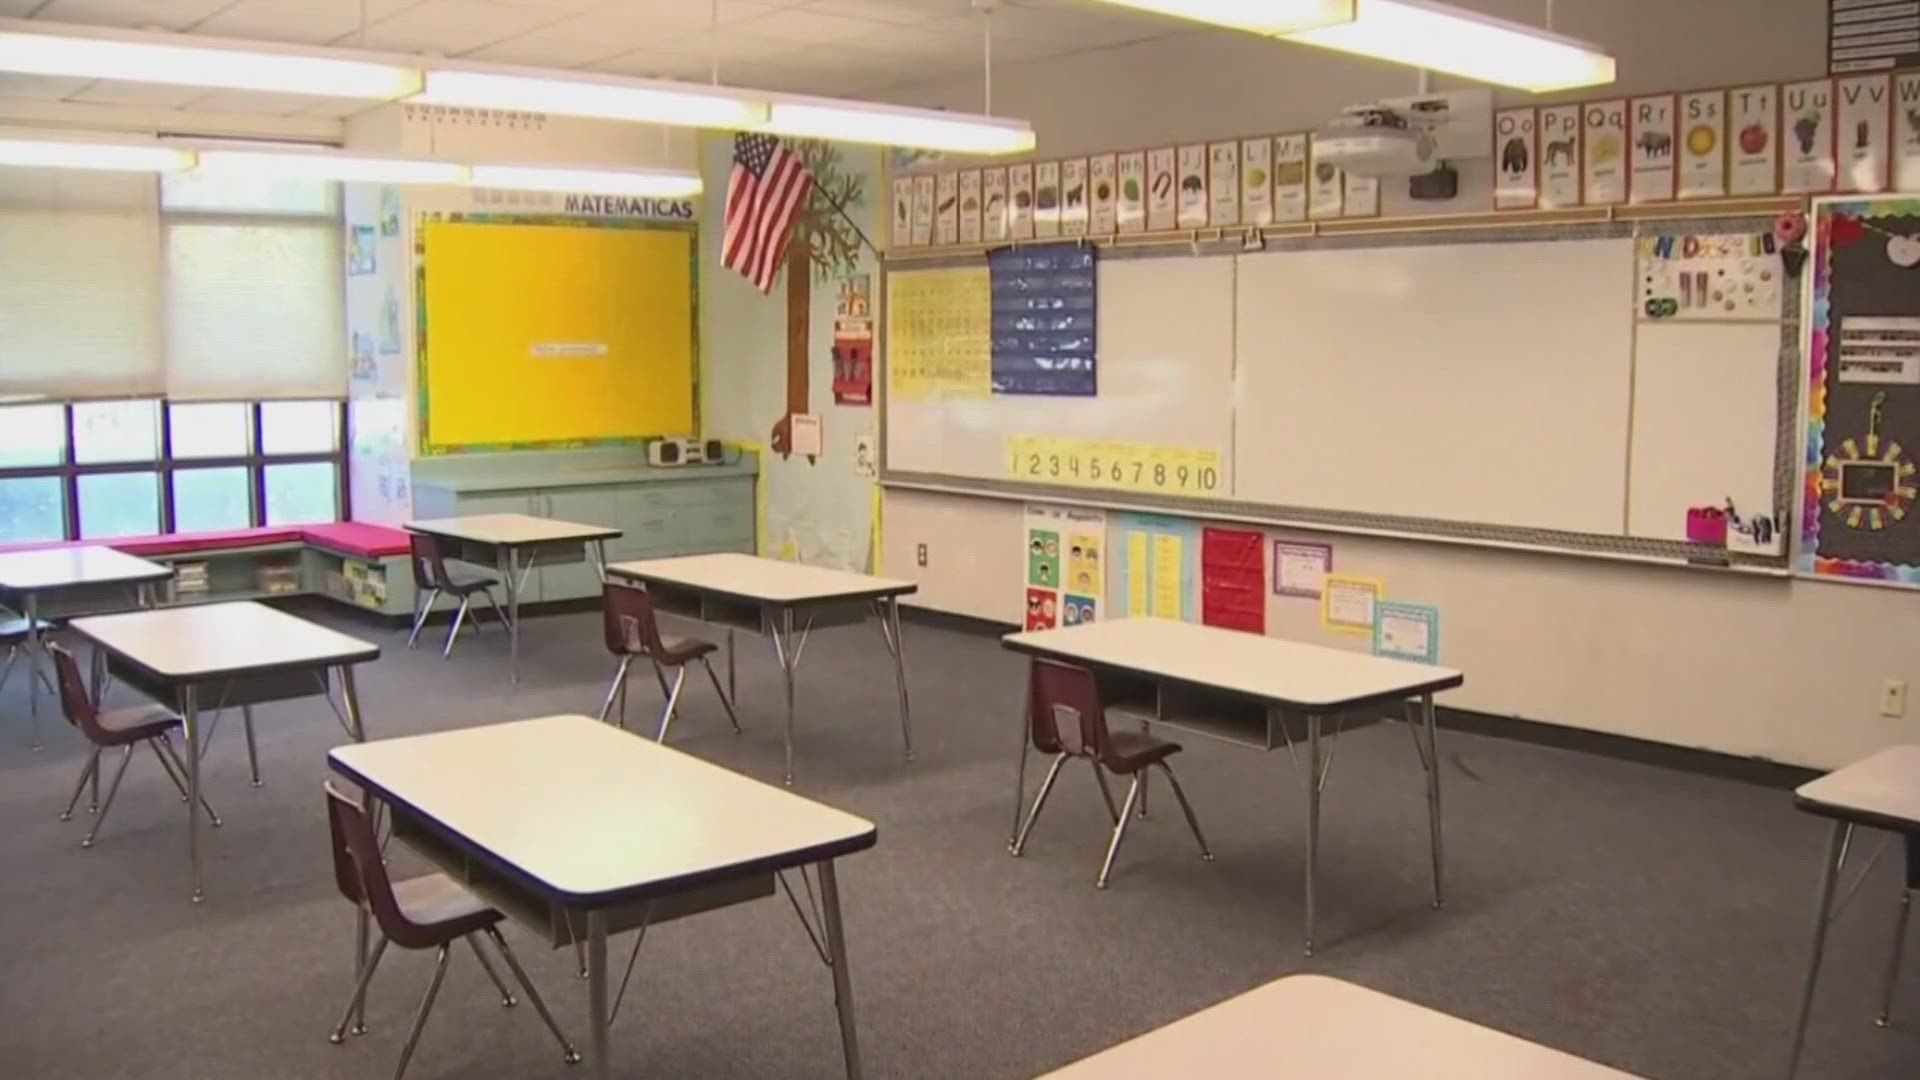 This year any Florida student can apply for a private school voucher due to new legislation expanding the program, which has been controversial.